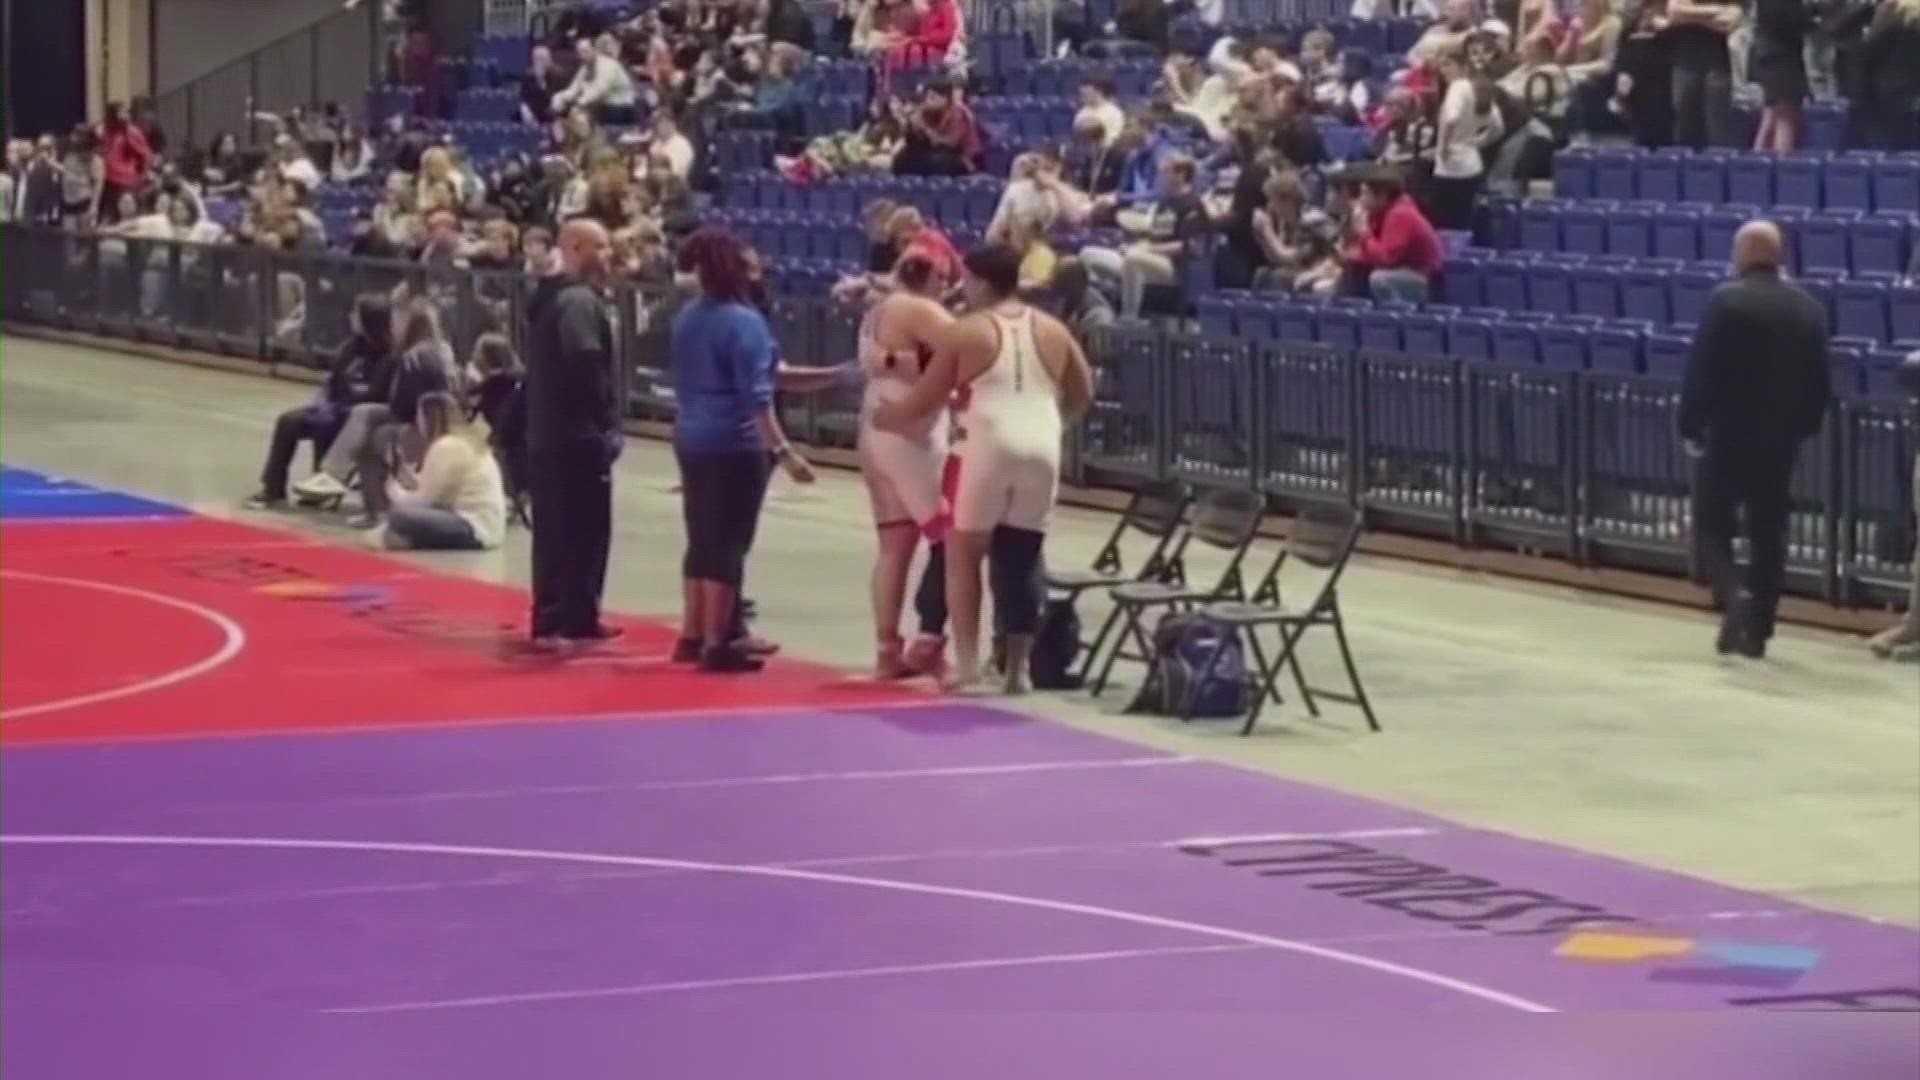 R.J. Trotter might be the best wrestler in the state, but it's his compassion that's making headlines.